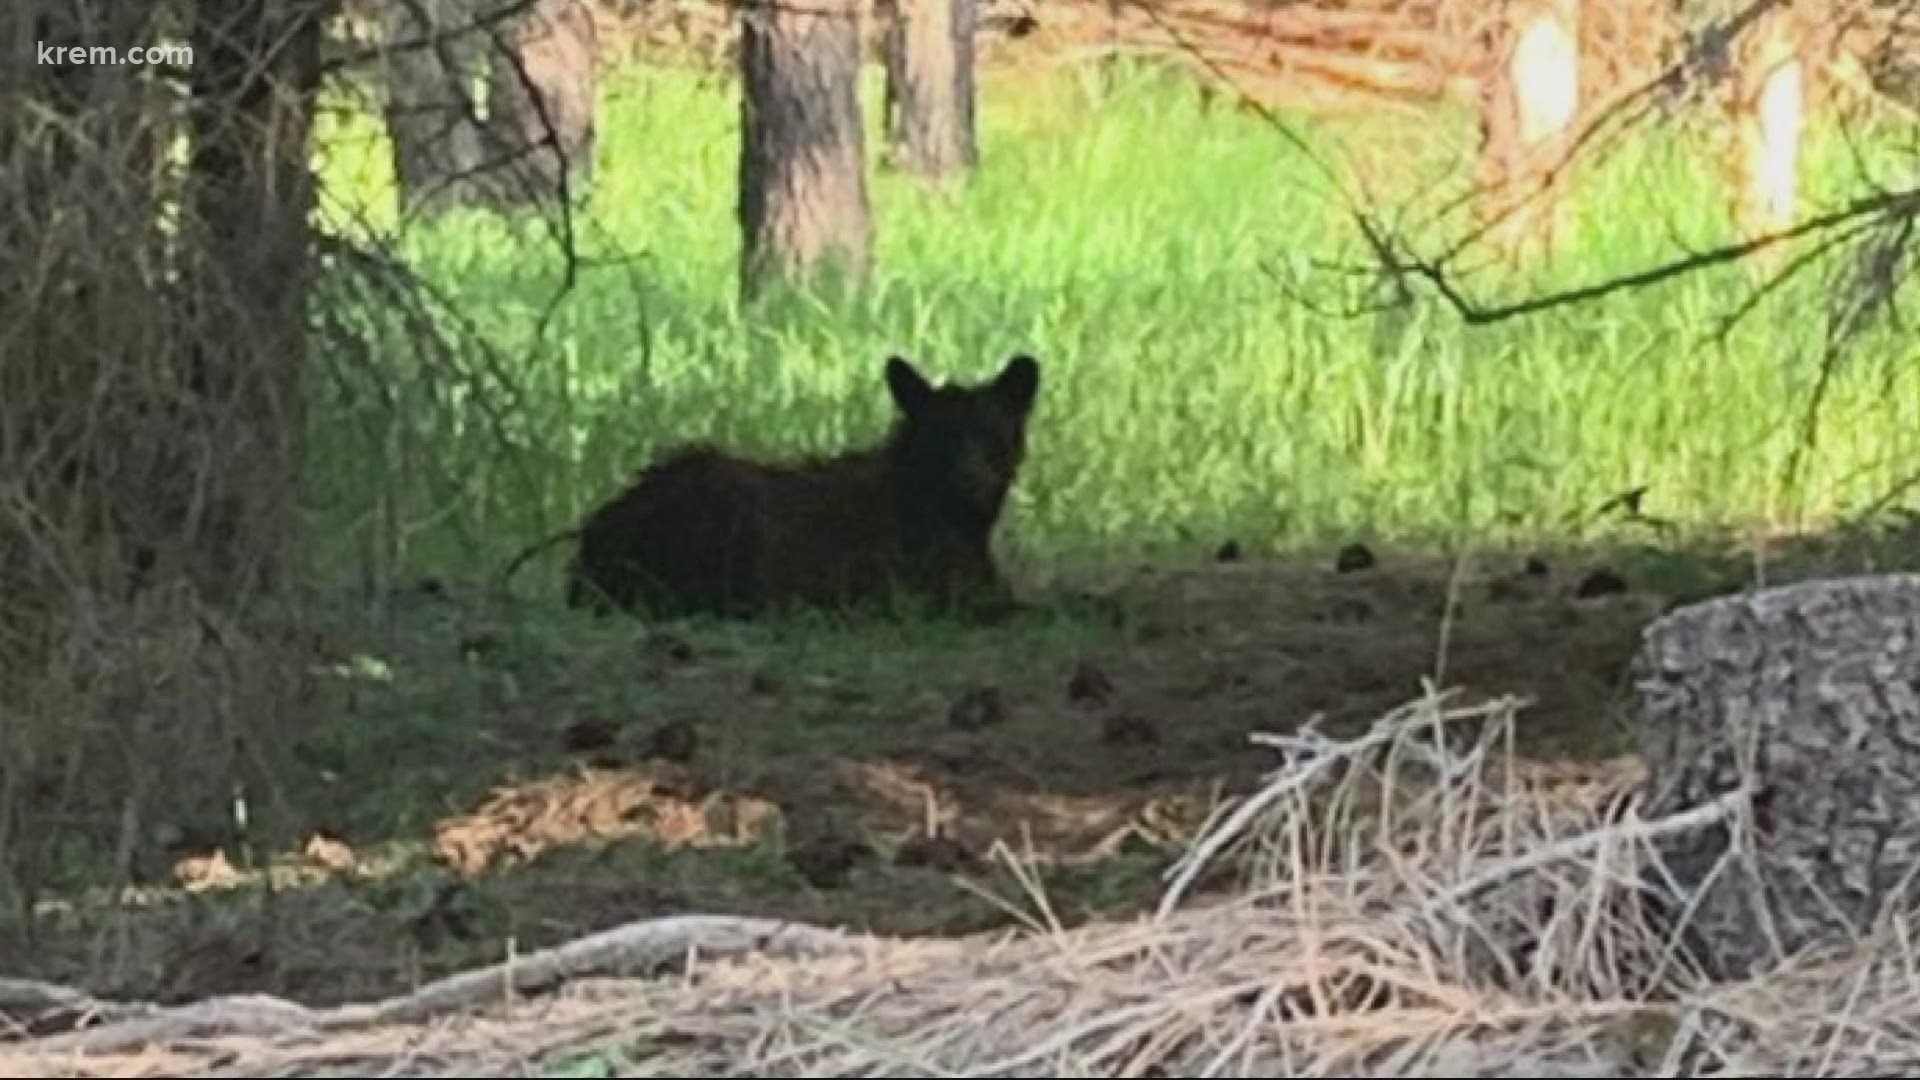 A bear has been seen in Spokane Valley three times this week. Experts share their advice for what to do in a bear encounter.